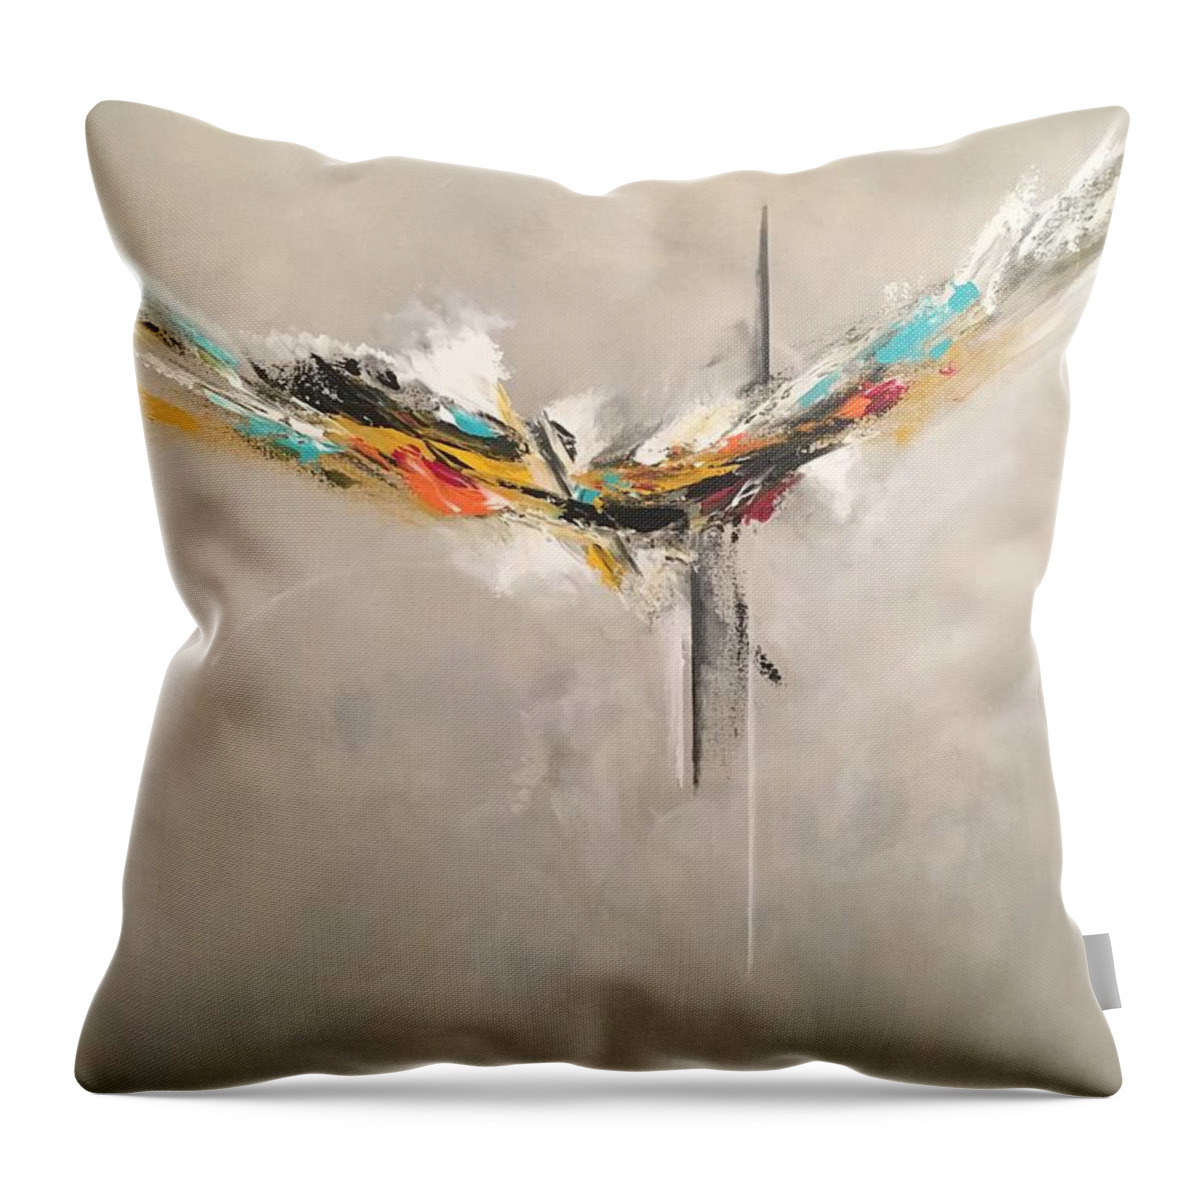 Abstract Throw Pillow featuring the painting Aspire by Soraya Silvestri